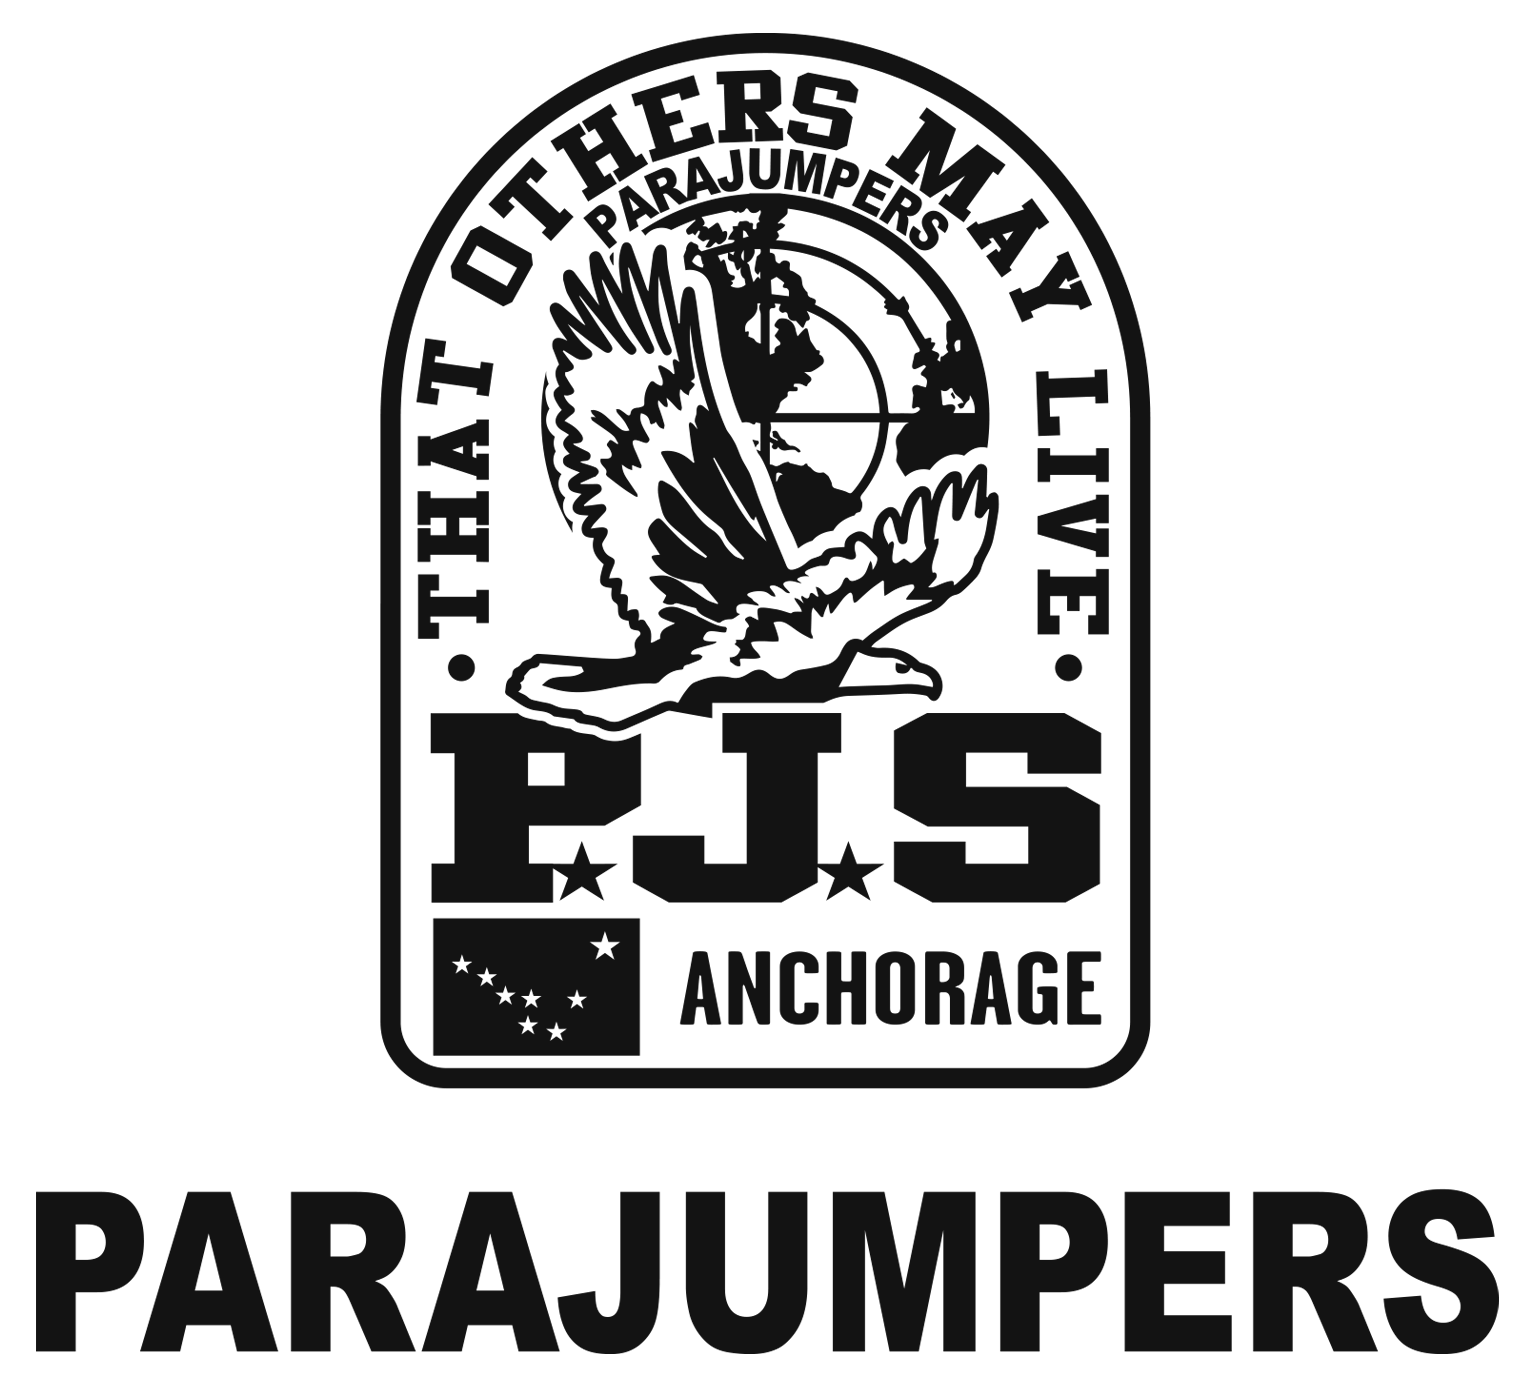 PARAJUMPERS